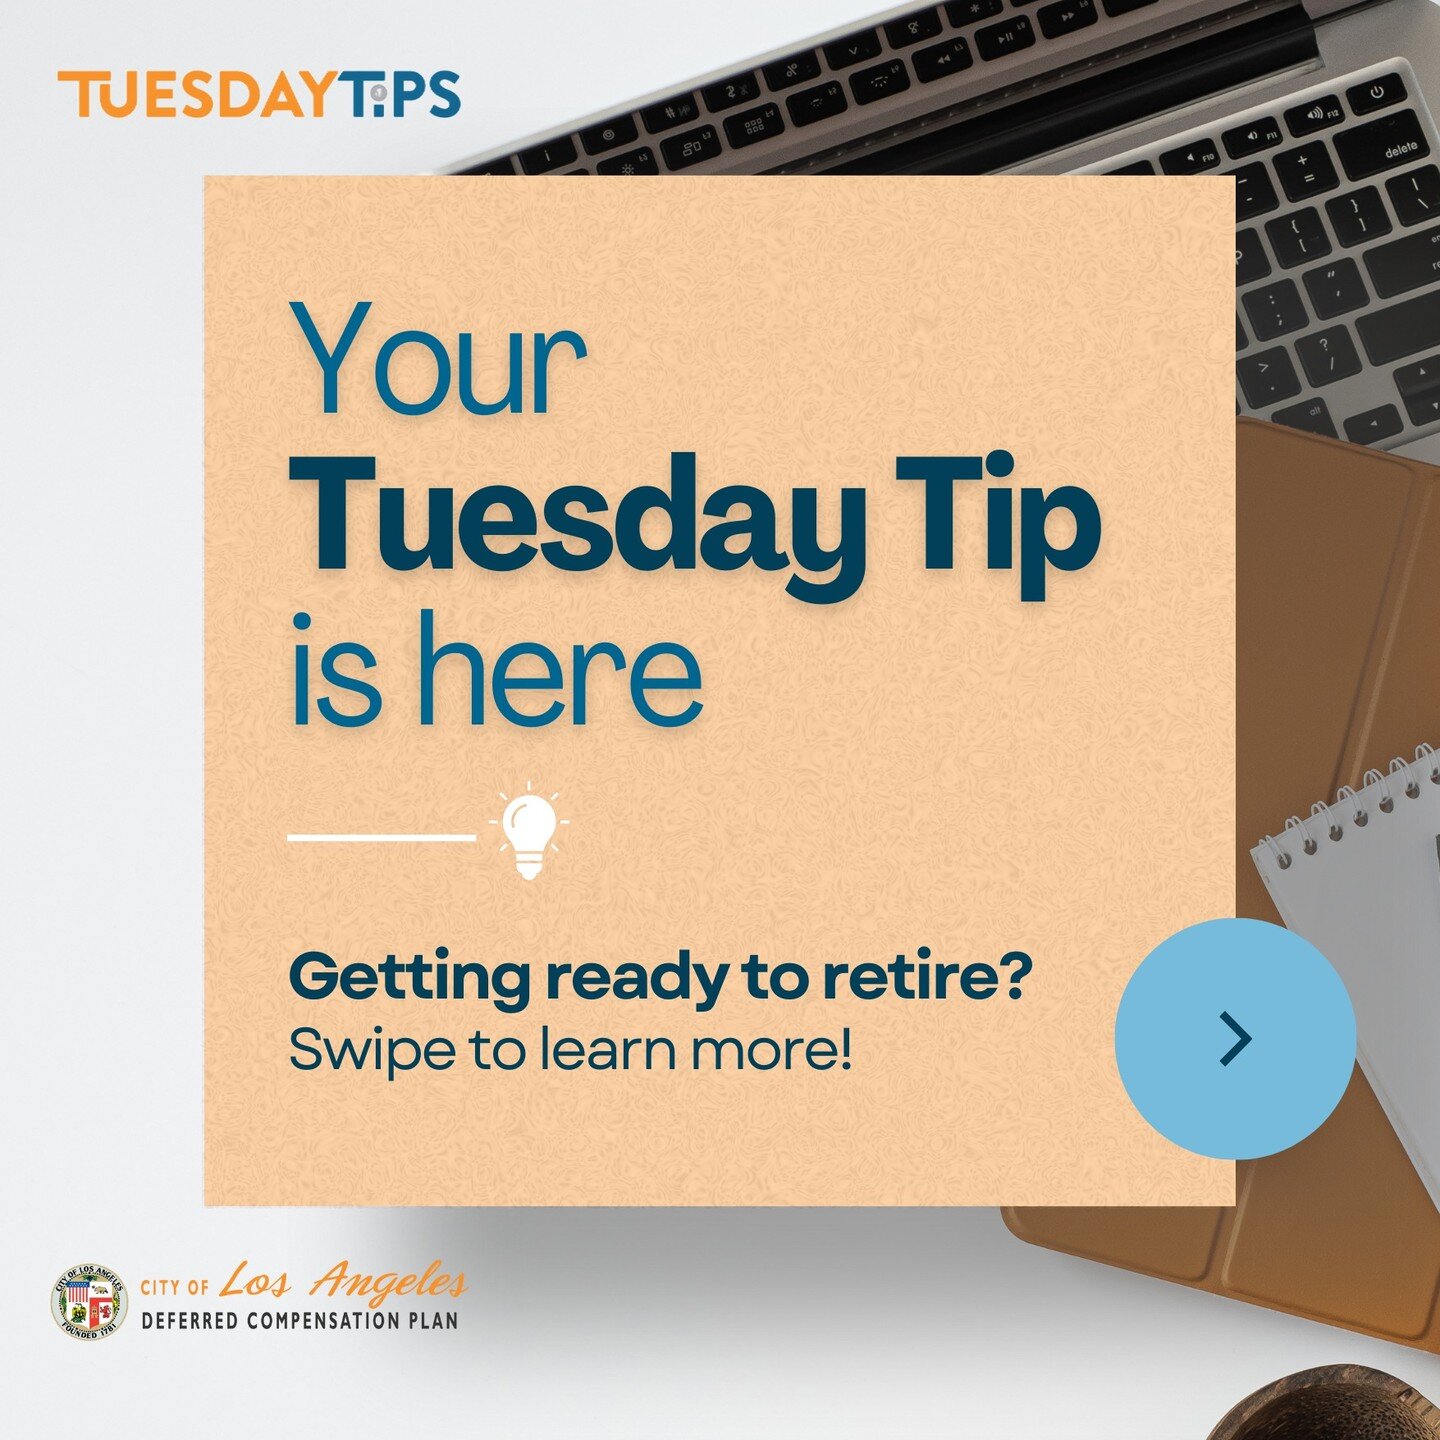 Ready to learn more about retirement-readiness? Join us on Wednesday, March 15, 2023 at 12:00 p.m. for a wide-ranging discussion about getting prepared for retirement with the DCP. Visit LA457.com/money-matters or check out the link in our bio to reg